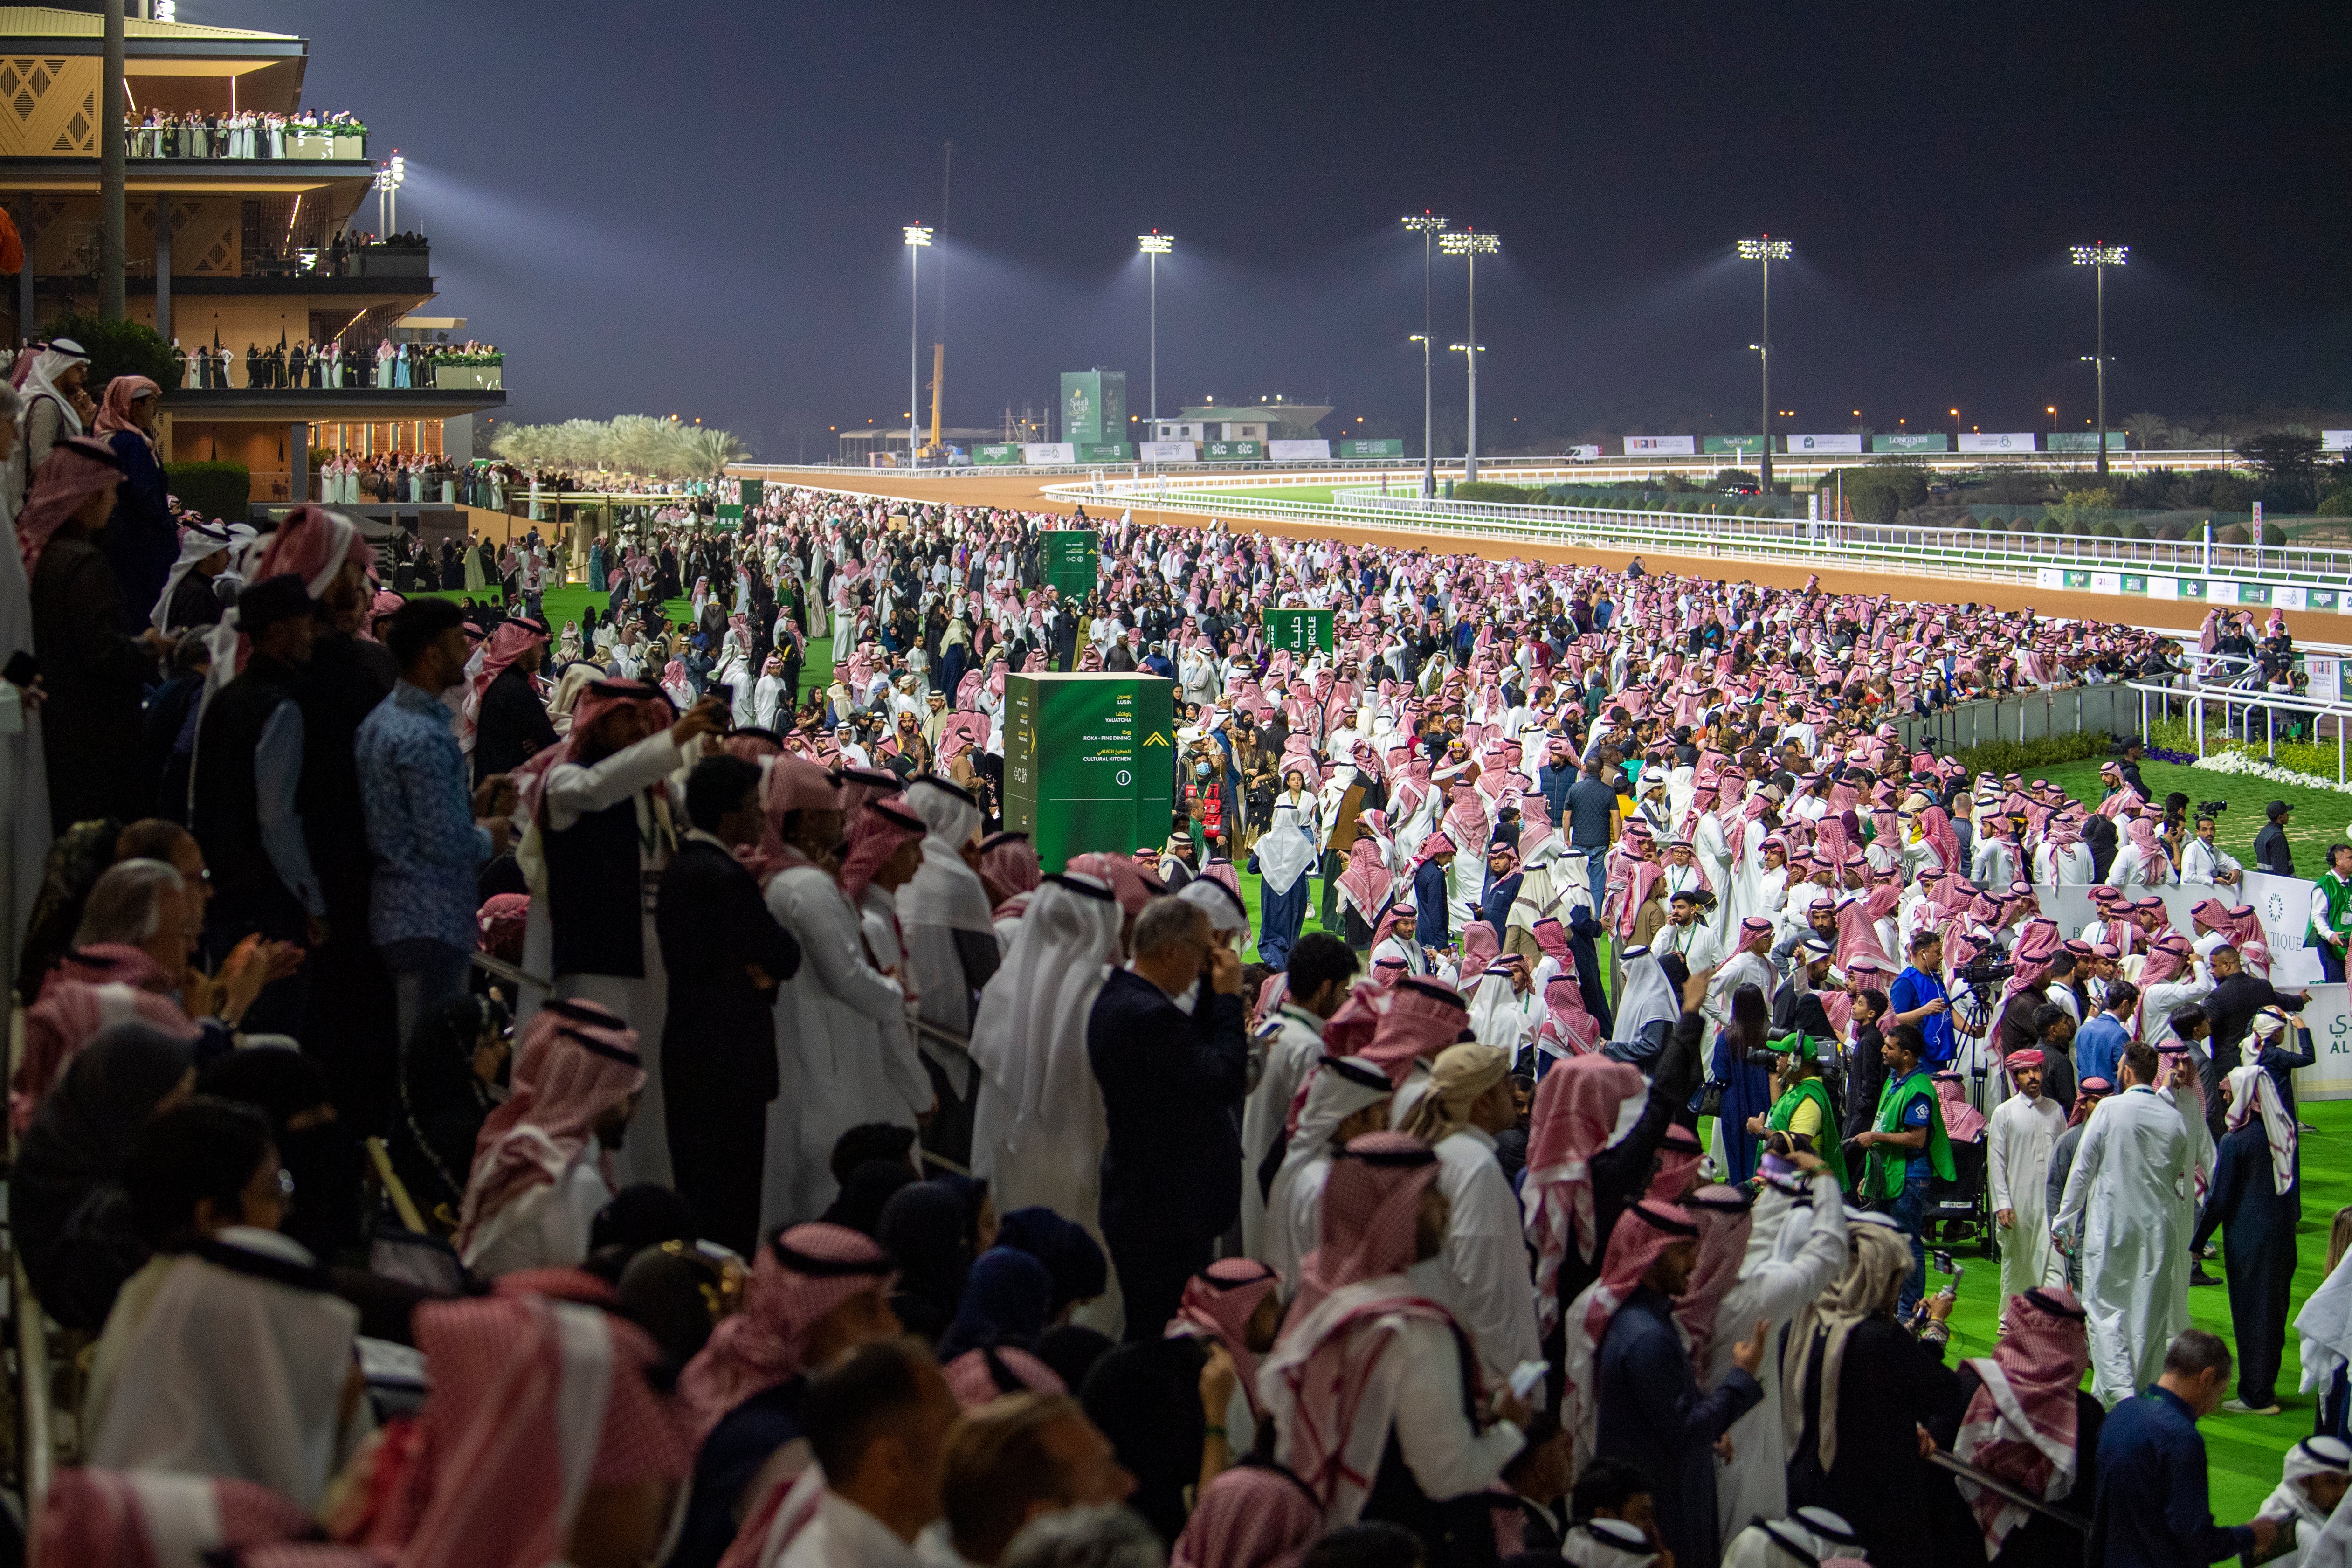 The King Abdulaziz racetrack - a far cry from the sport’s more humble origins